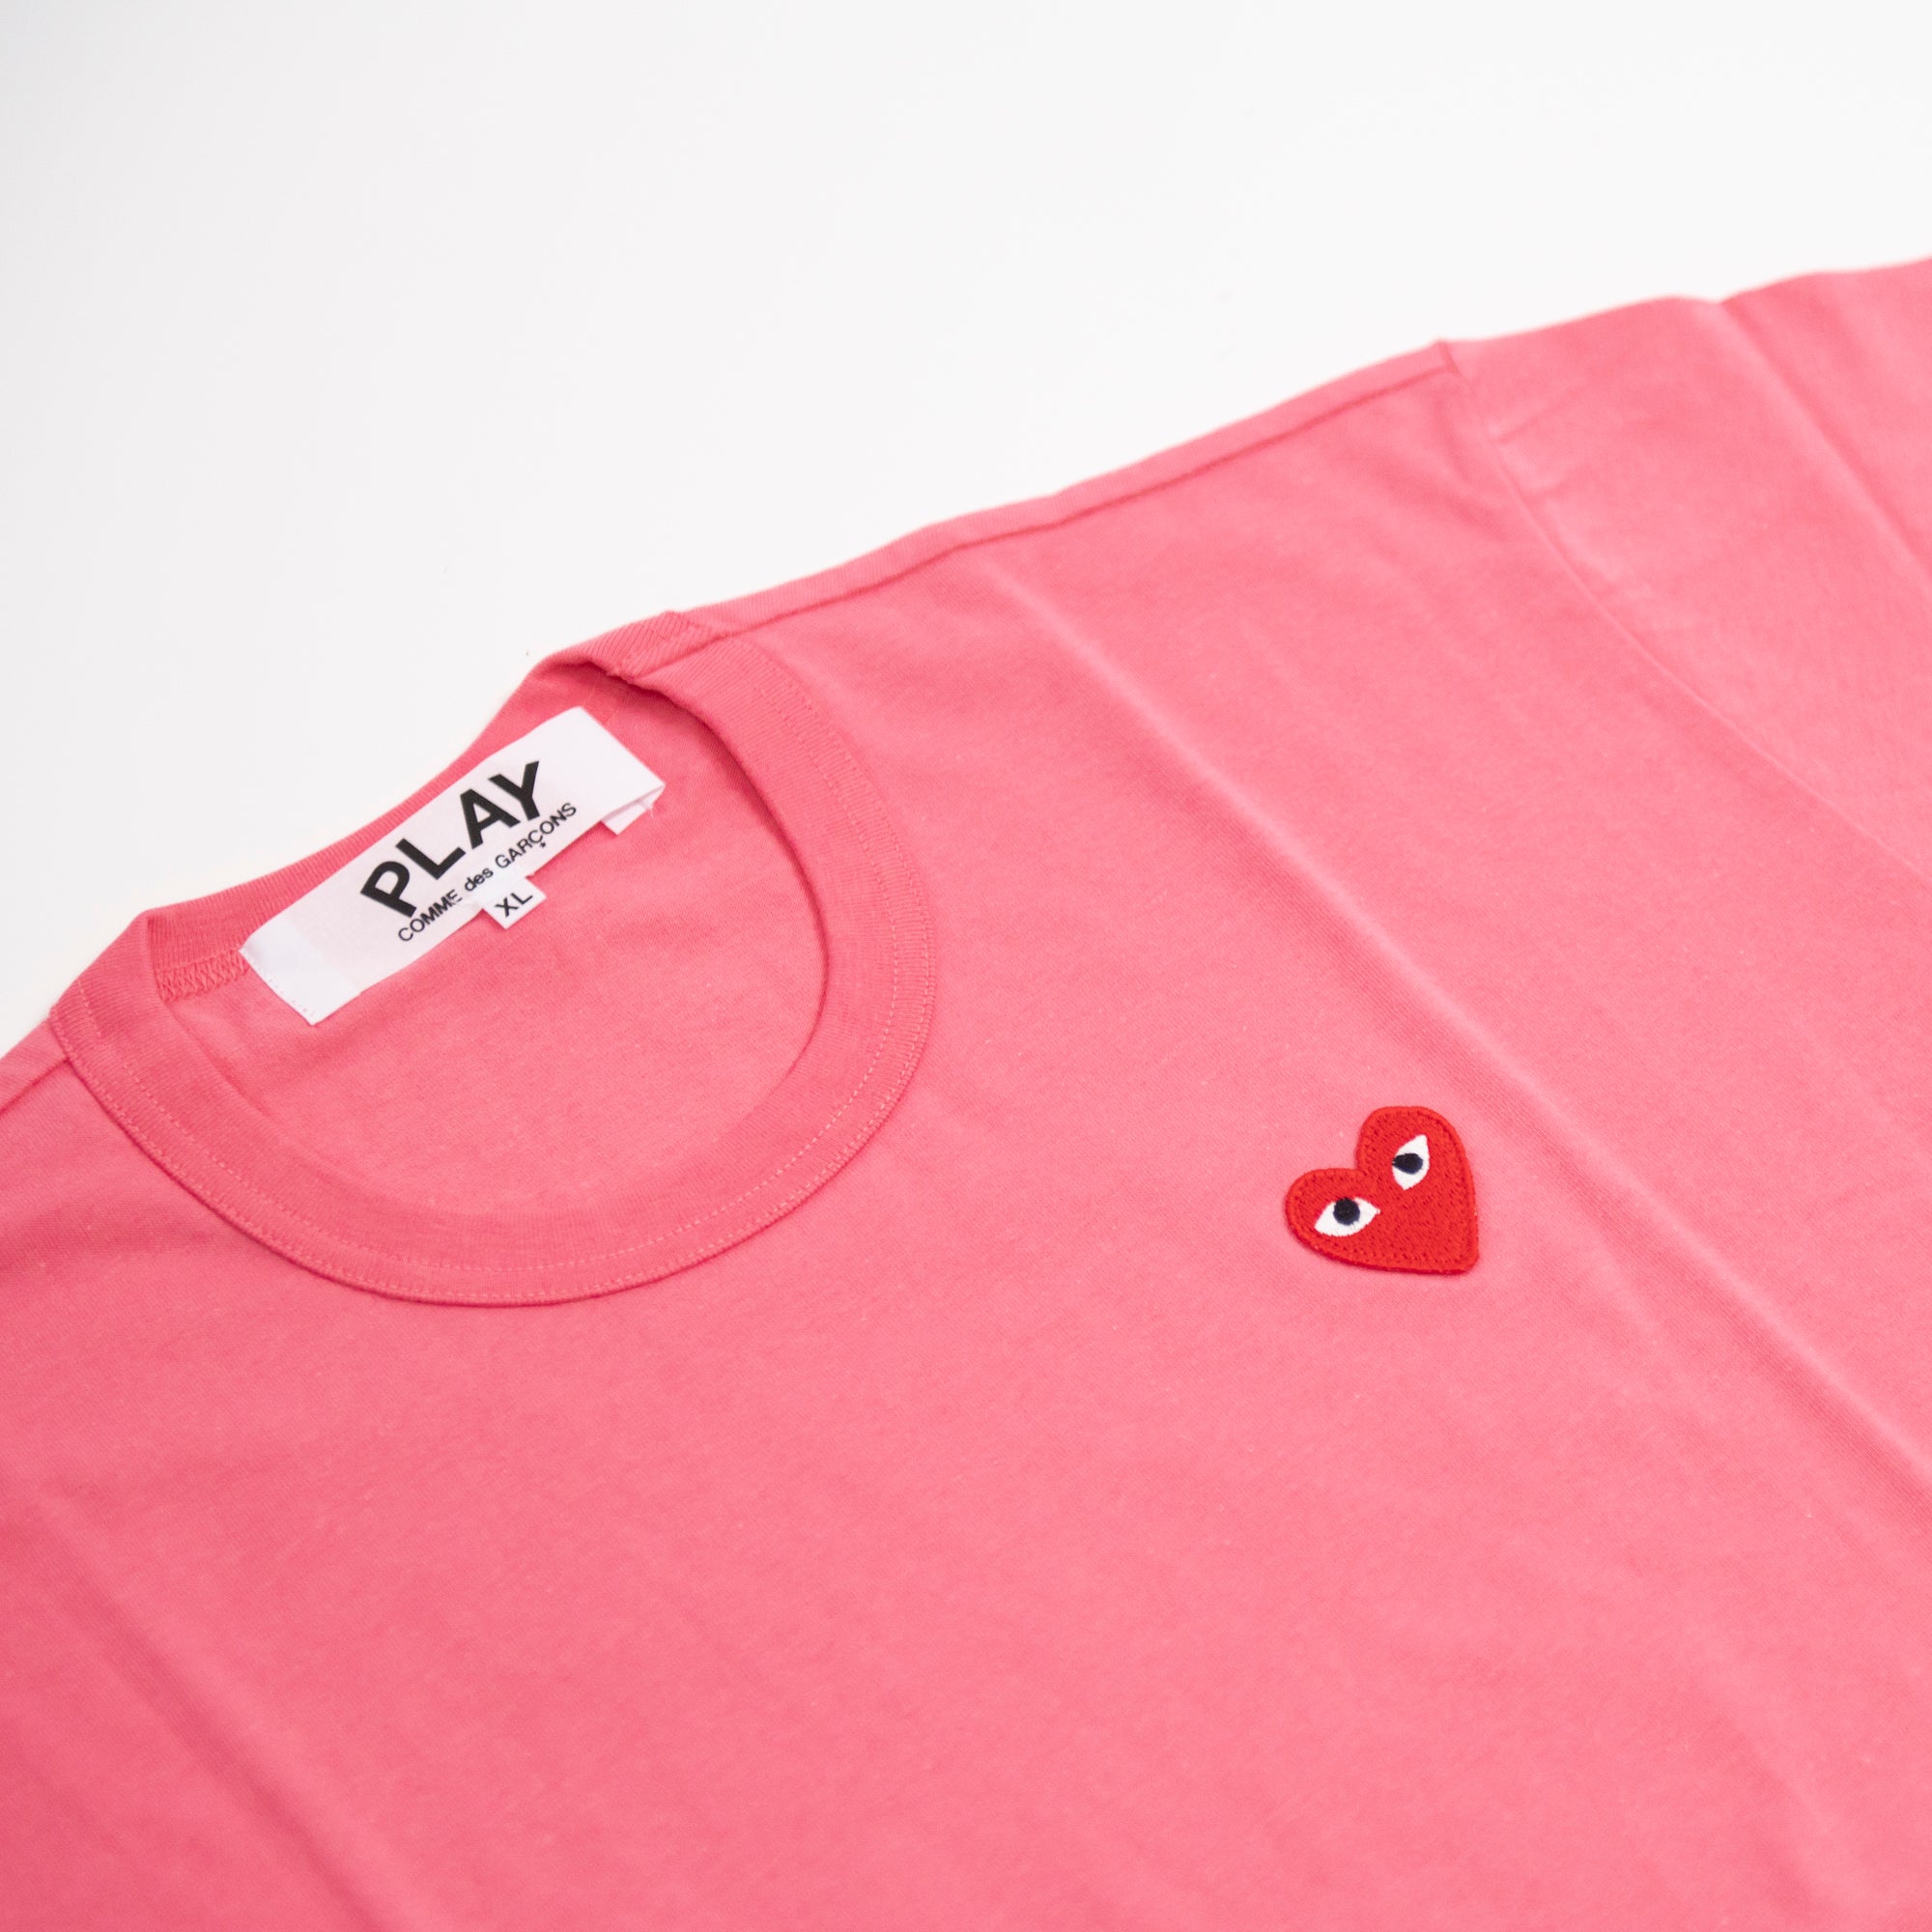 Play Comme des Garcons Red Heart T-Shirt